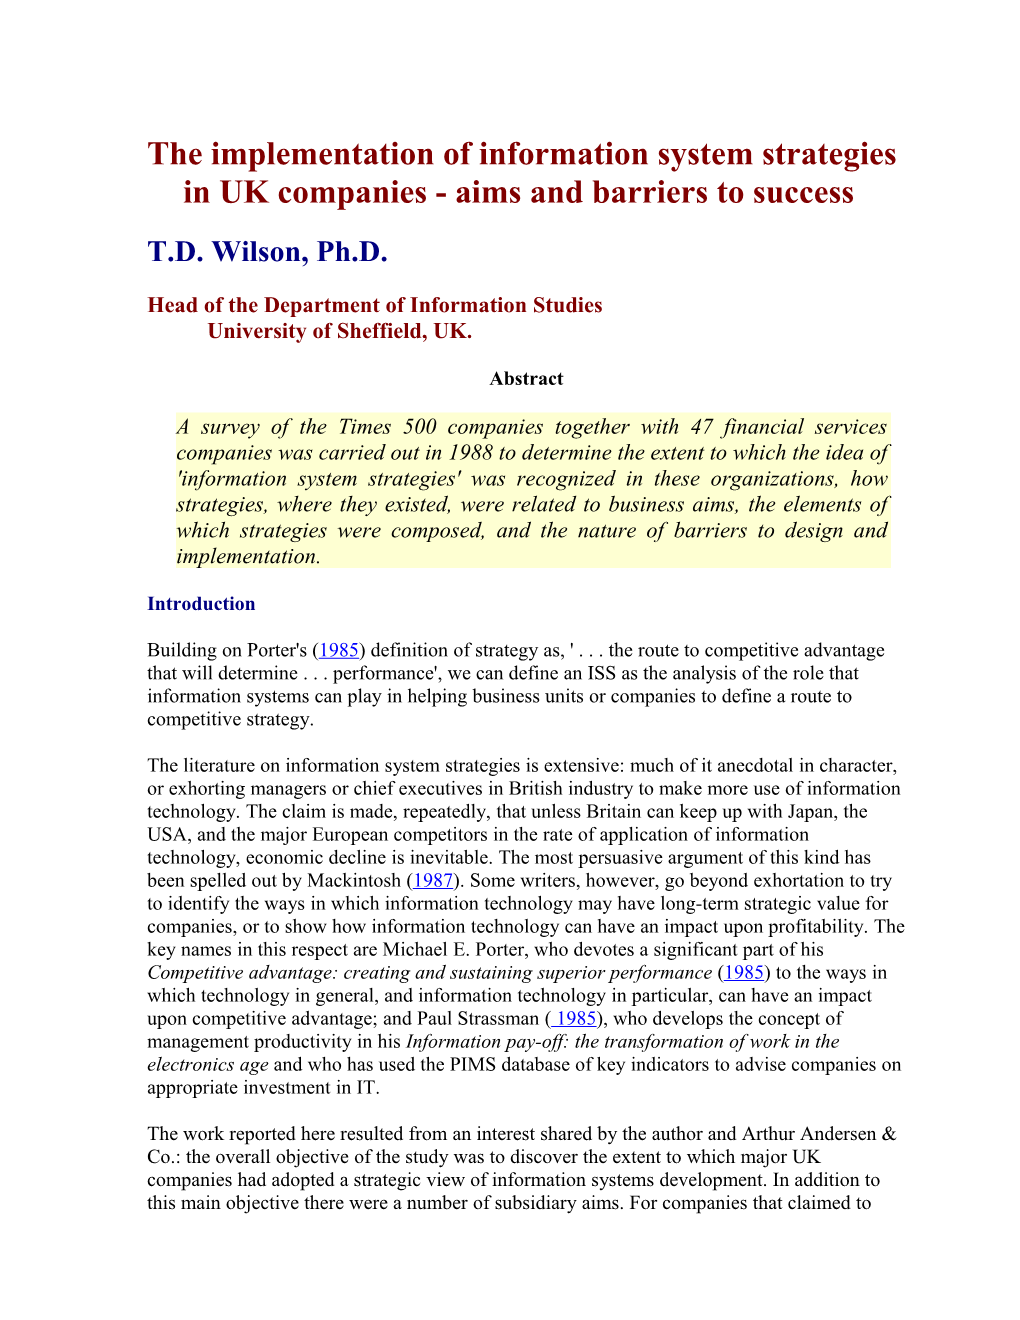 The Implementation of Information System Strategies in UK Companies - Aims and Barriers